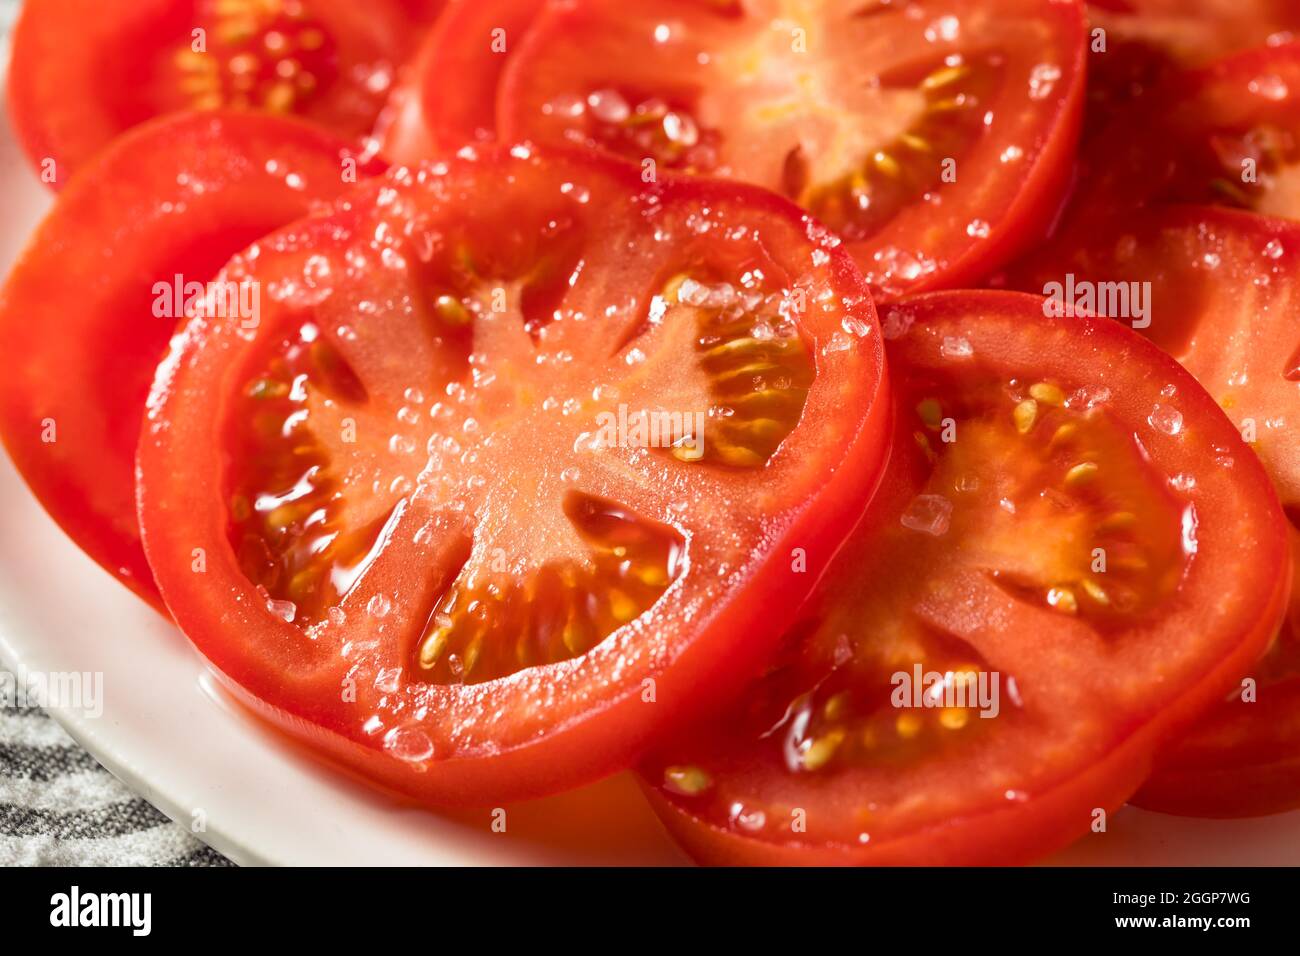 Healthy Organic Sliced Tomatoes with Salt Ready to Eat Stock Photo